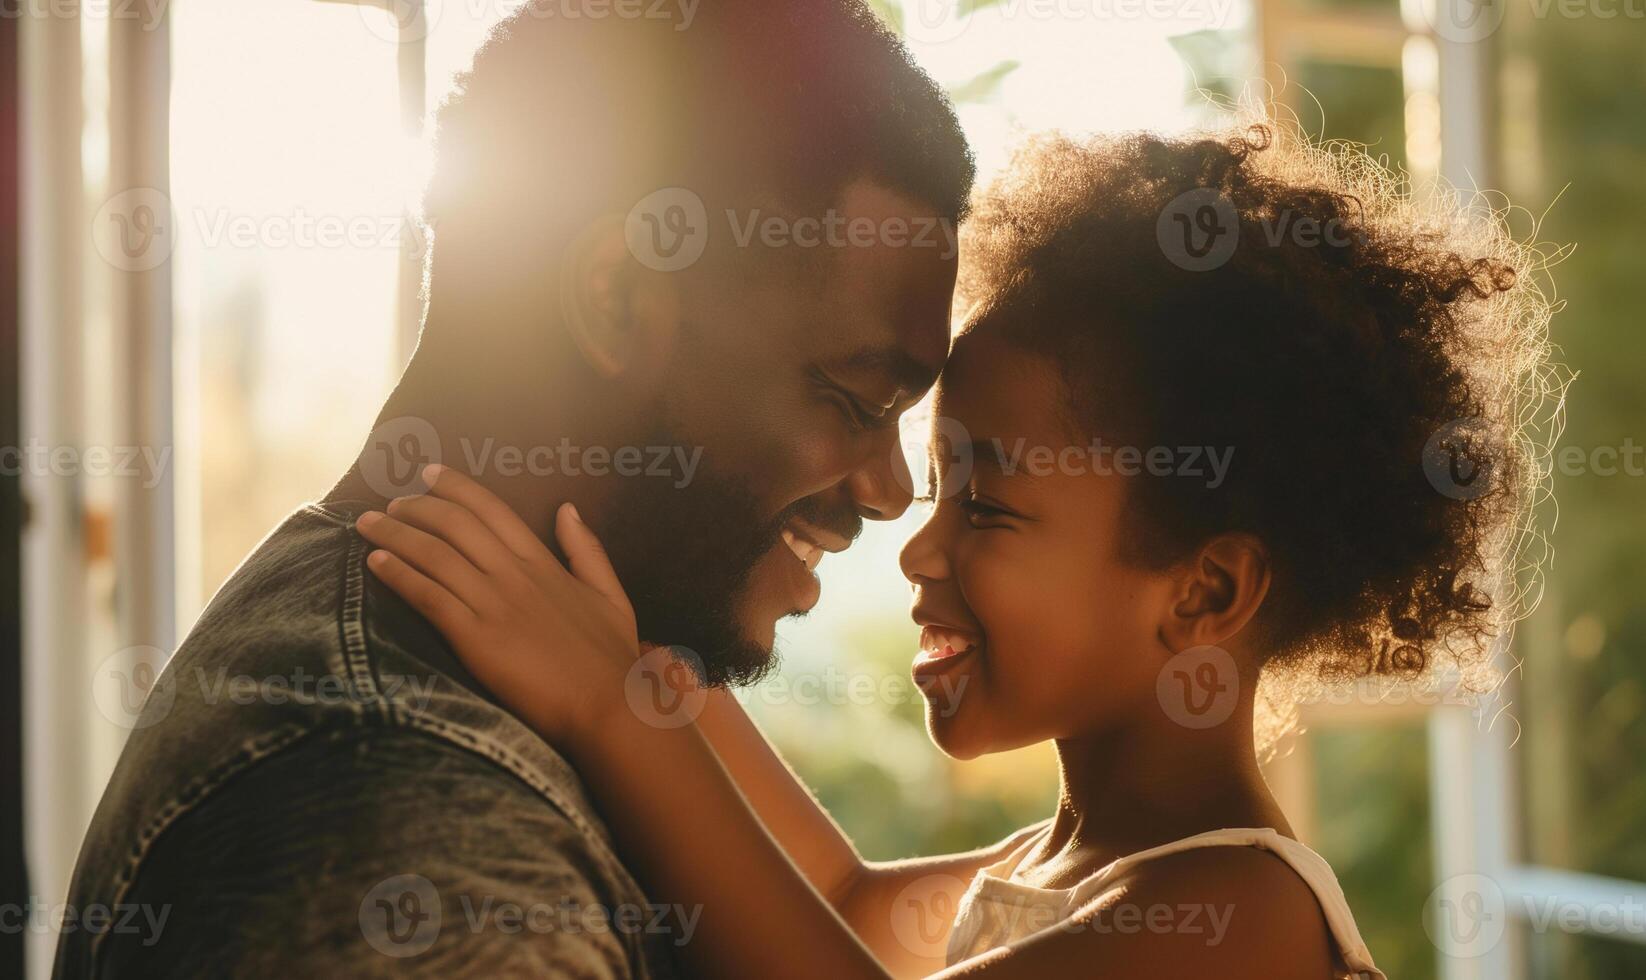 Joyful African American Dad and Daughter Sharing a Tender Moment in Sunlit Room photo